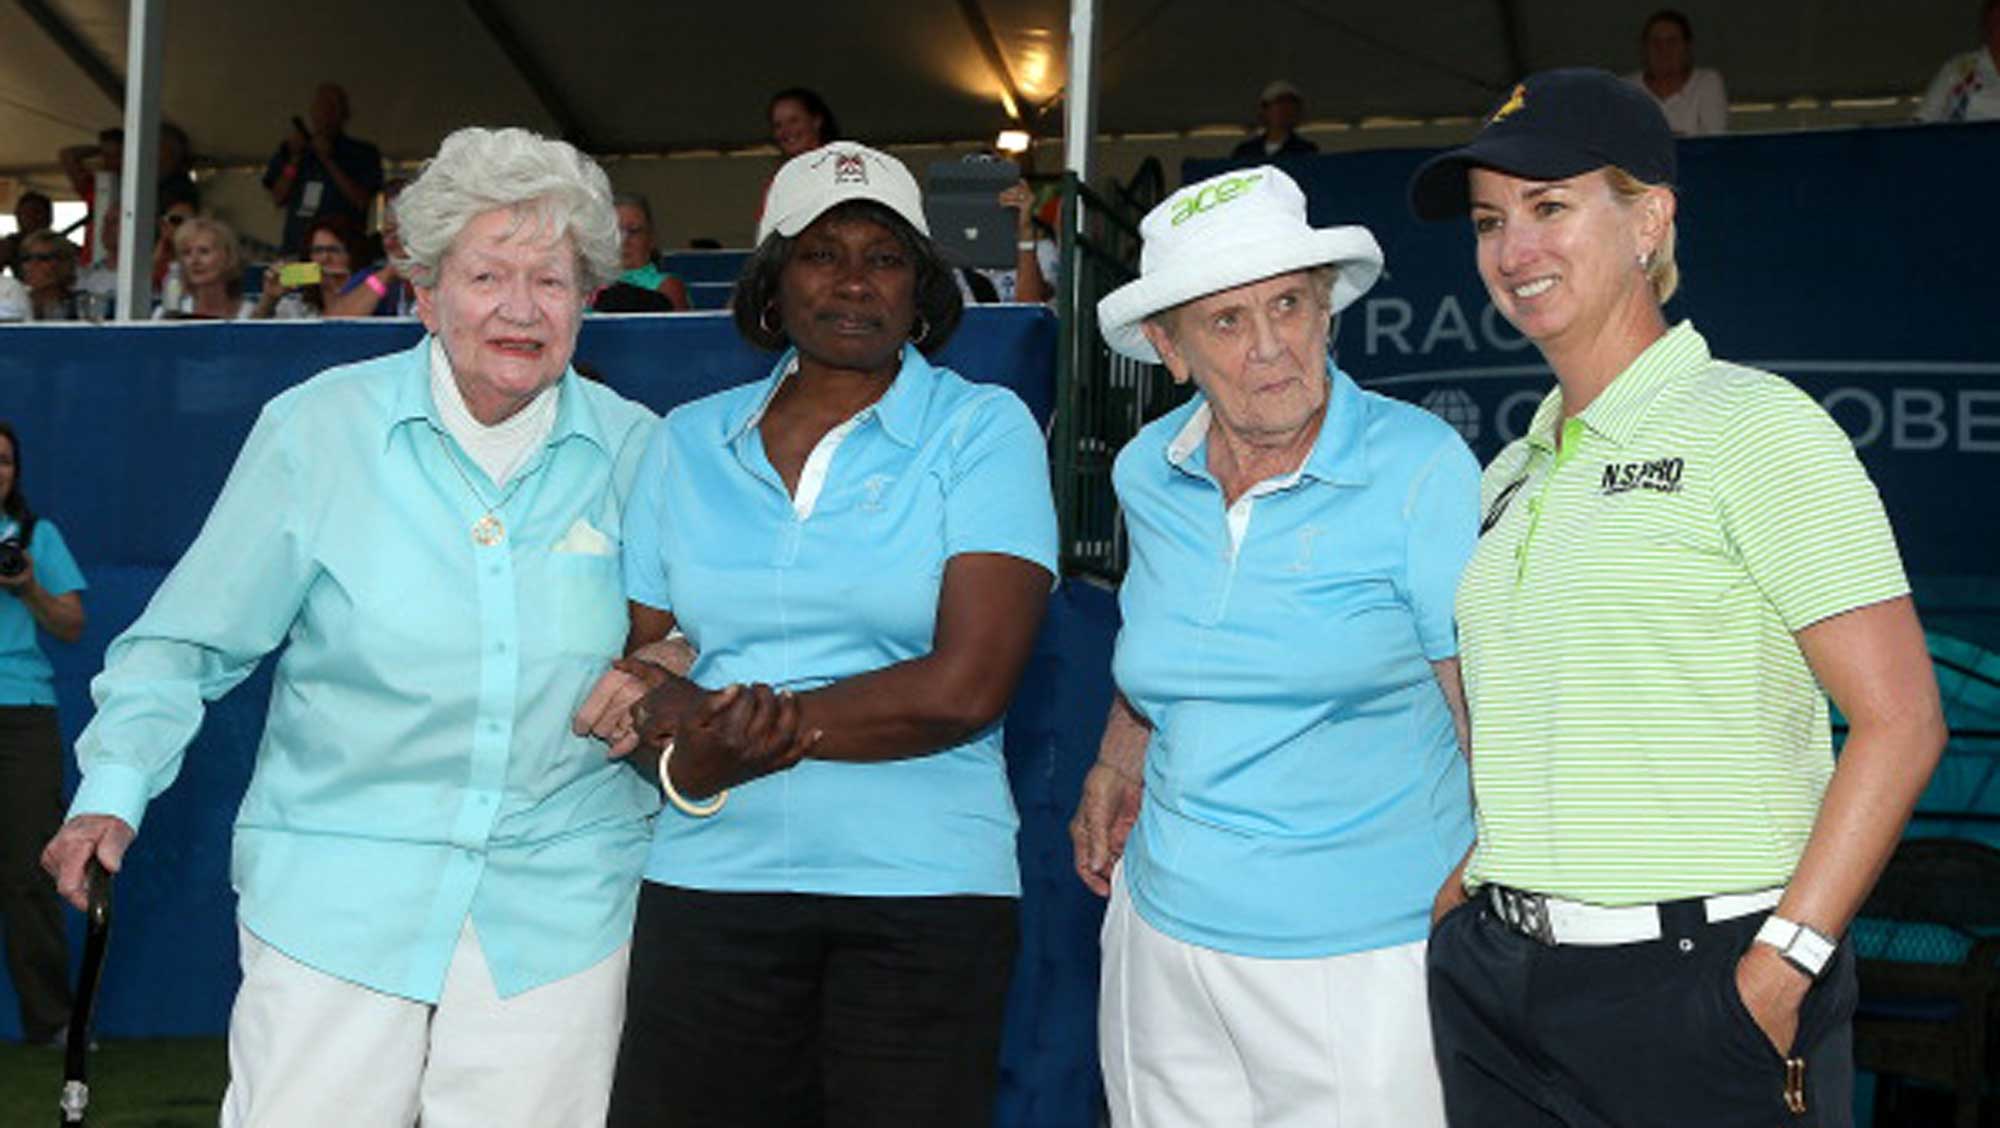 2020 The Volvik Founders Cup Revitalized the LPGA by Celebrating the Women Who Made It Great